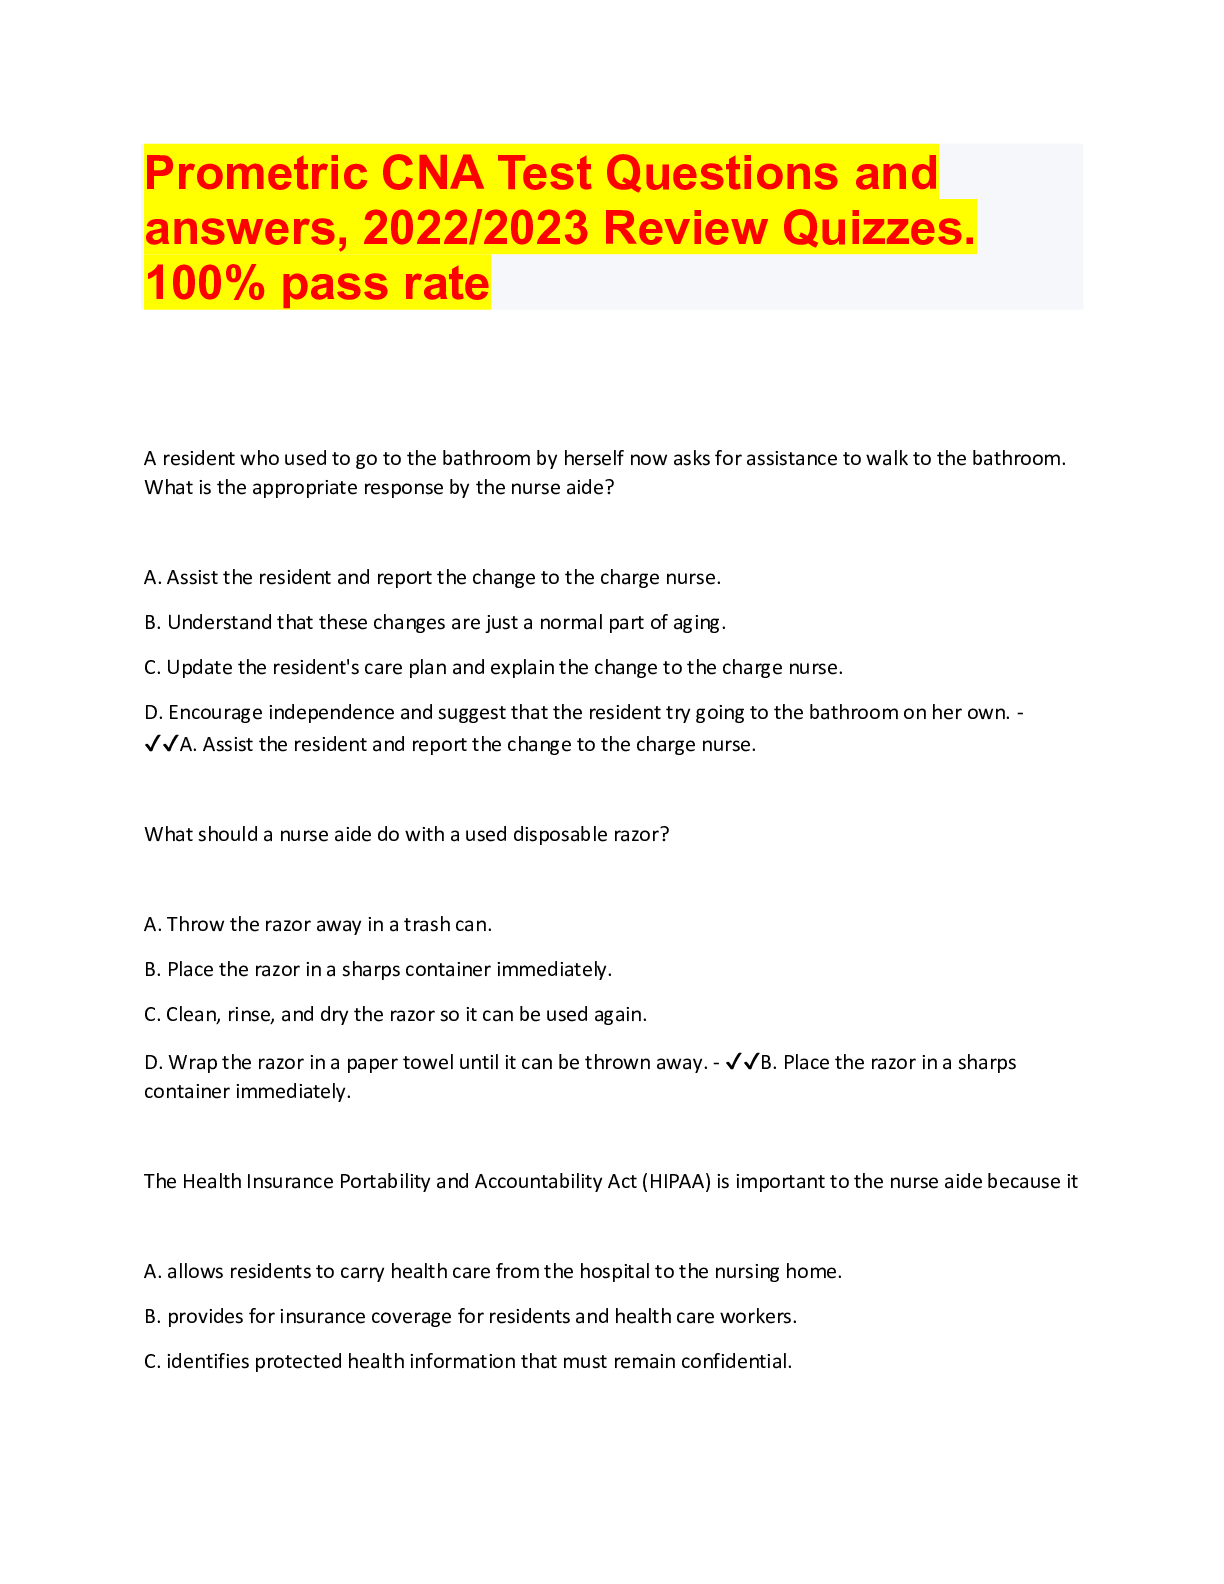 redcross cna test questions